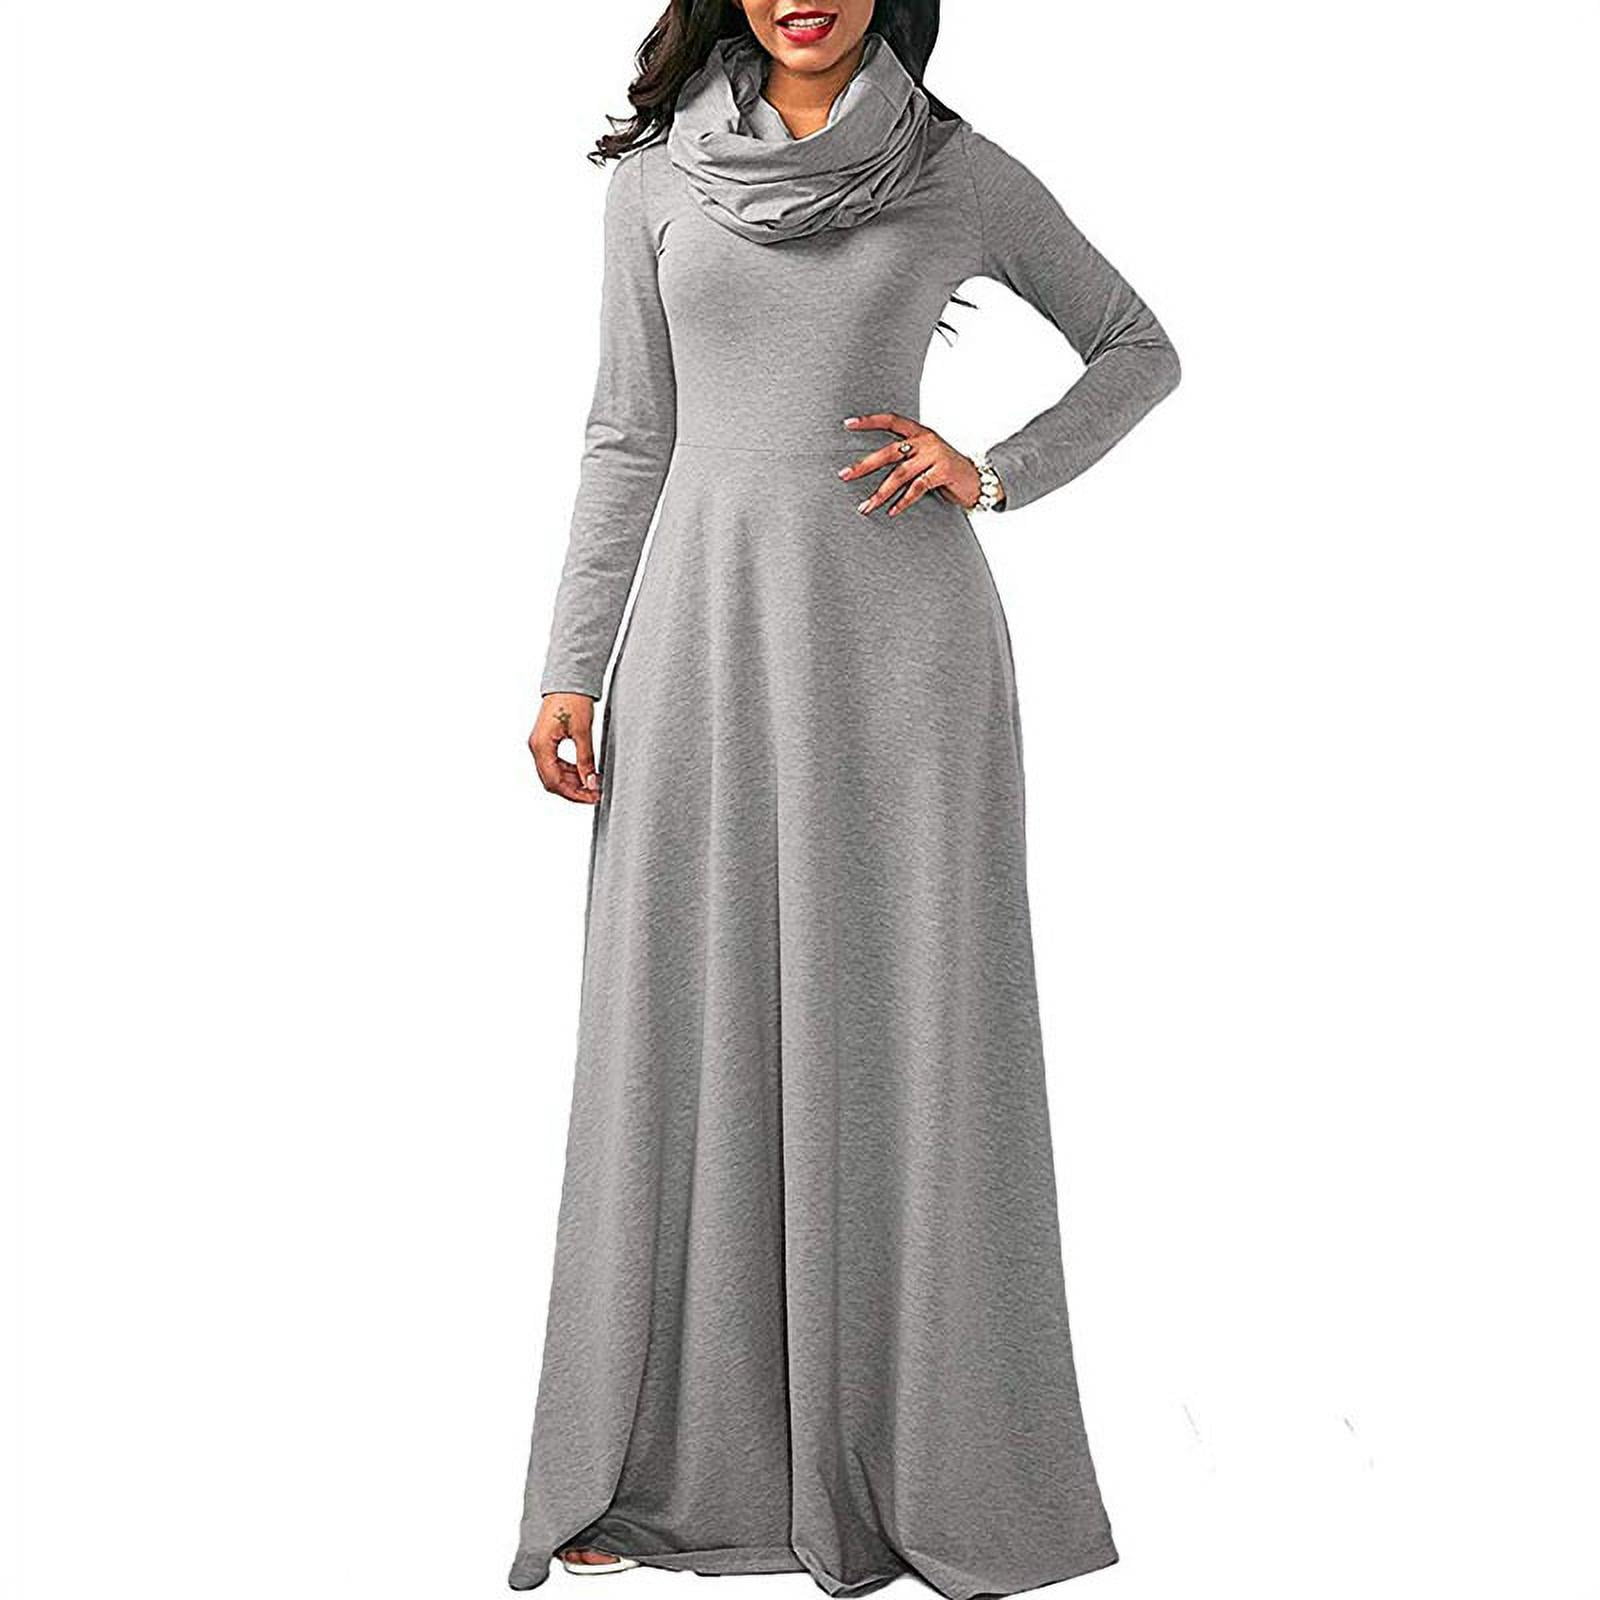 Casual Solid Maxi Dress for Women,Fall Winter Round Neck Long Sleeve A-Line Dress Loose Flowy Pleated Pocket Dress 